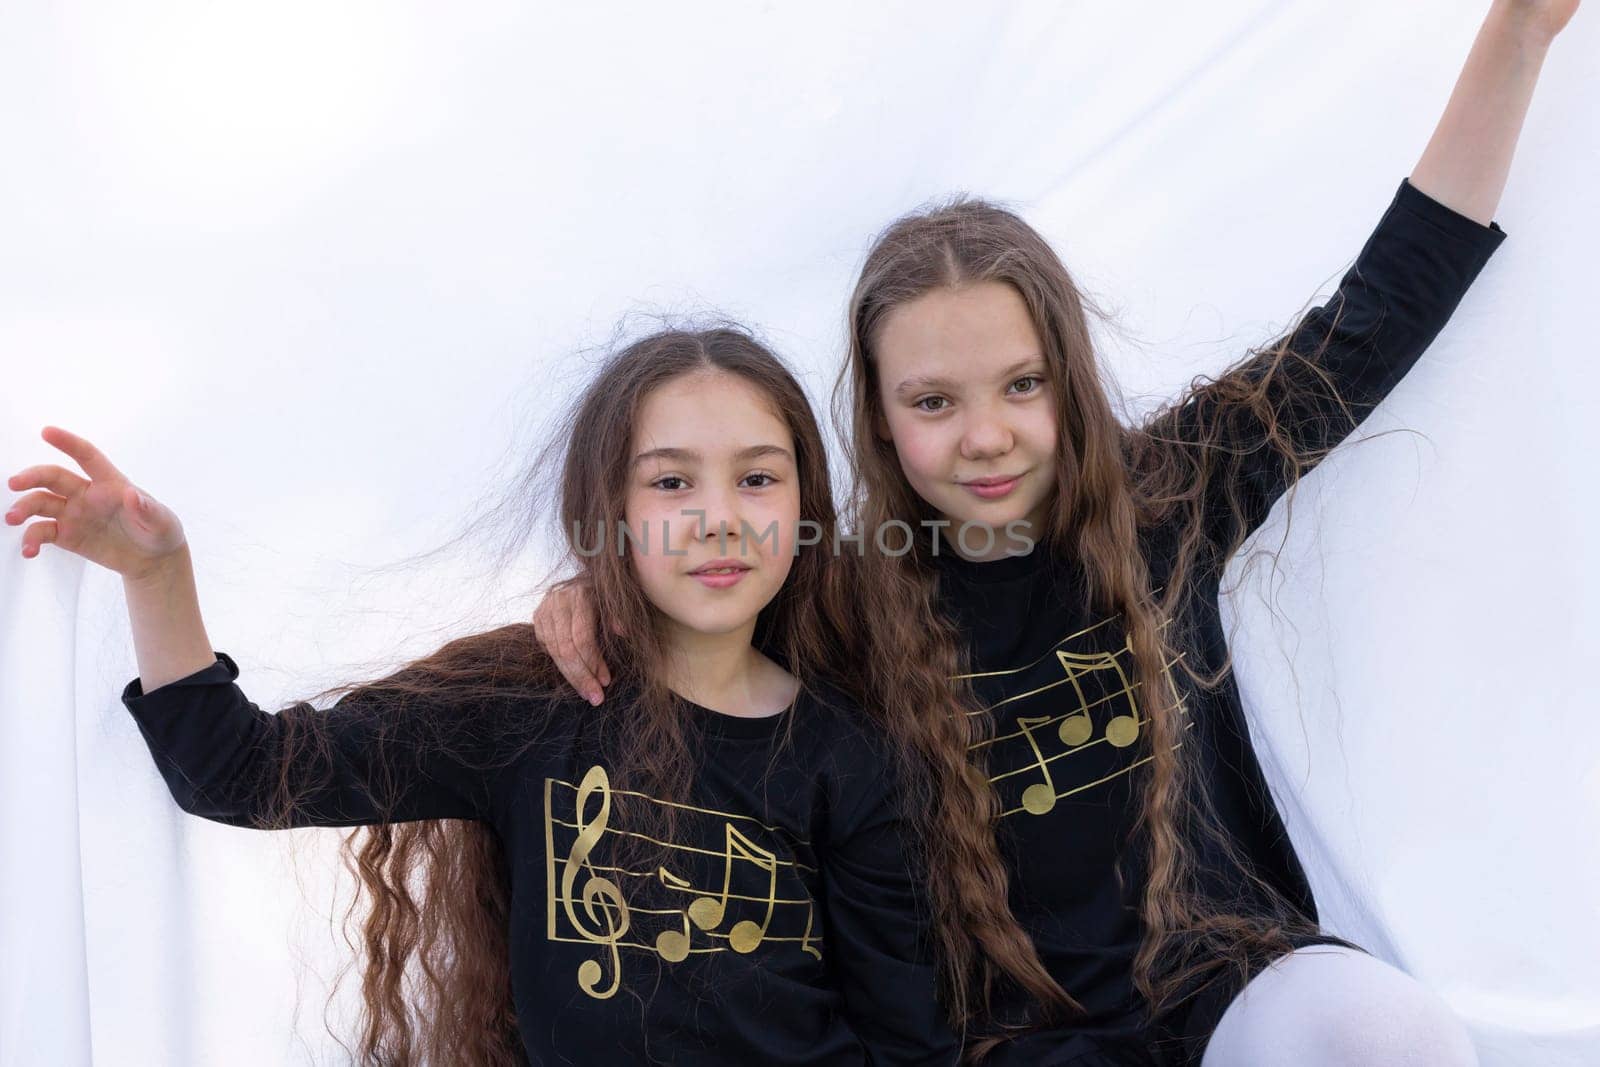 Two Smiling Girls, Sisters With Long Hair Having Fun Under Sheet On Grass in Park, Making Tent. Caucasian Asian Siblings Enjoy Time Together. Carefree Childhood, True Friendship. Horizontal Plane. by netatsi